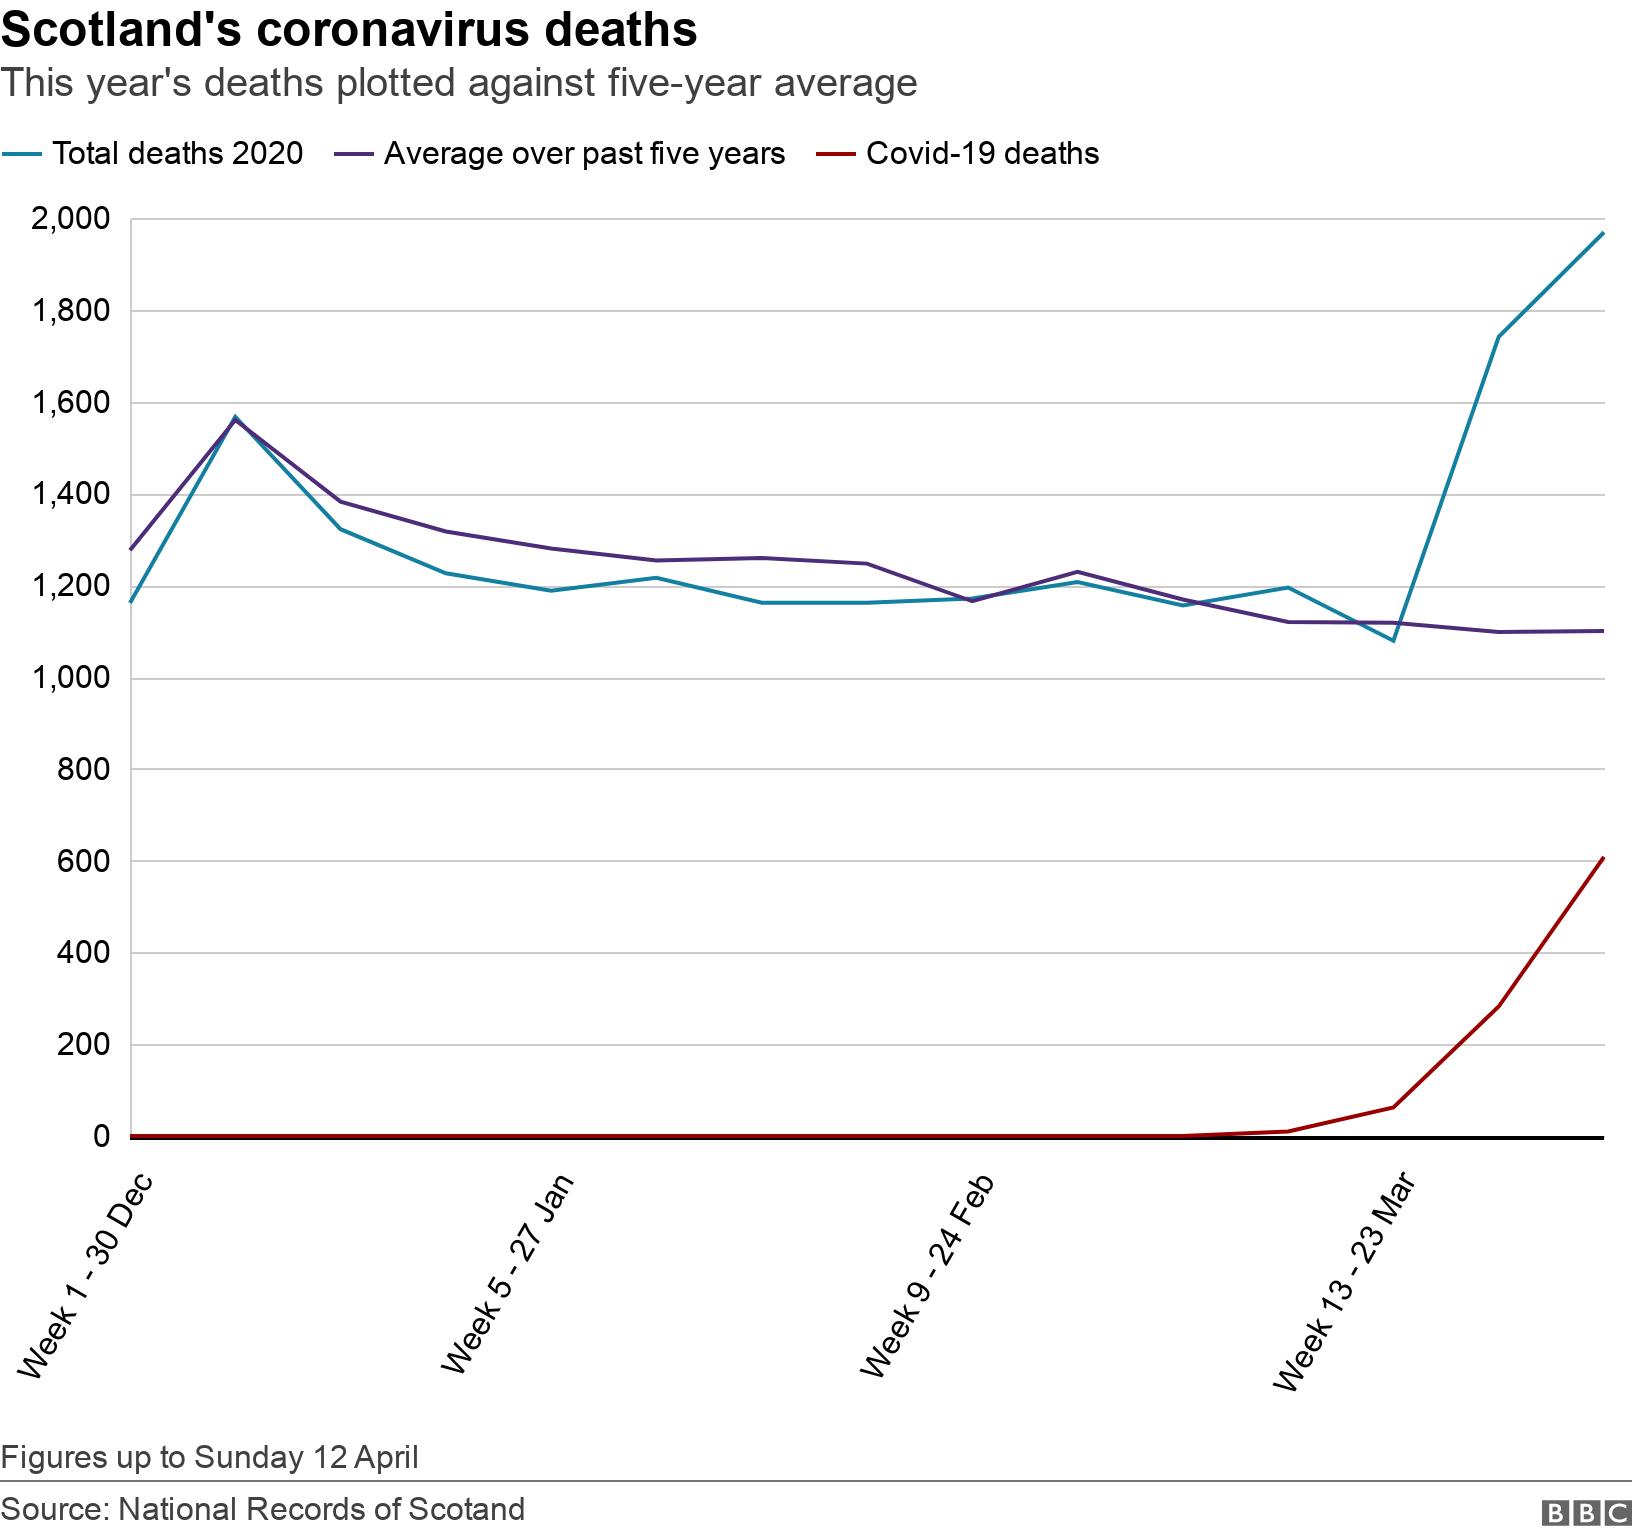 Scotland&#39;s coronavirus deaths. This year&#39;s deaths plotted against five-year average. Figures up to Sunday 12 April.